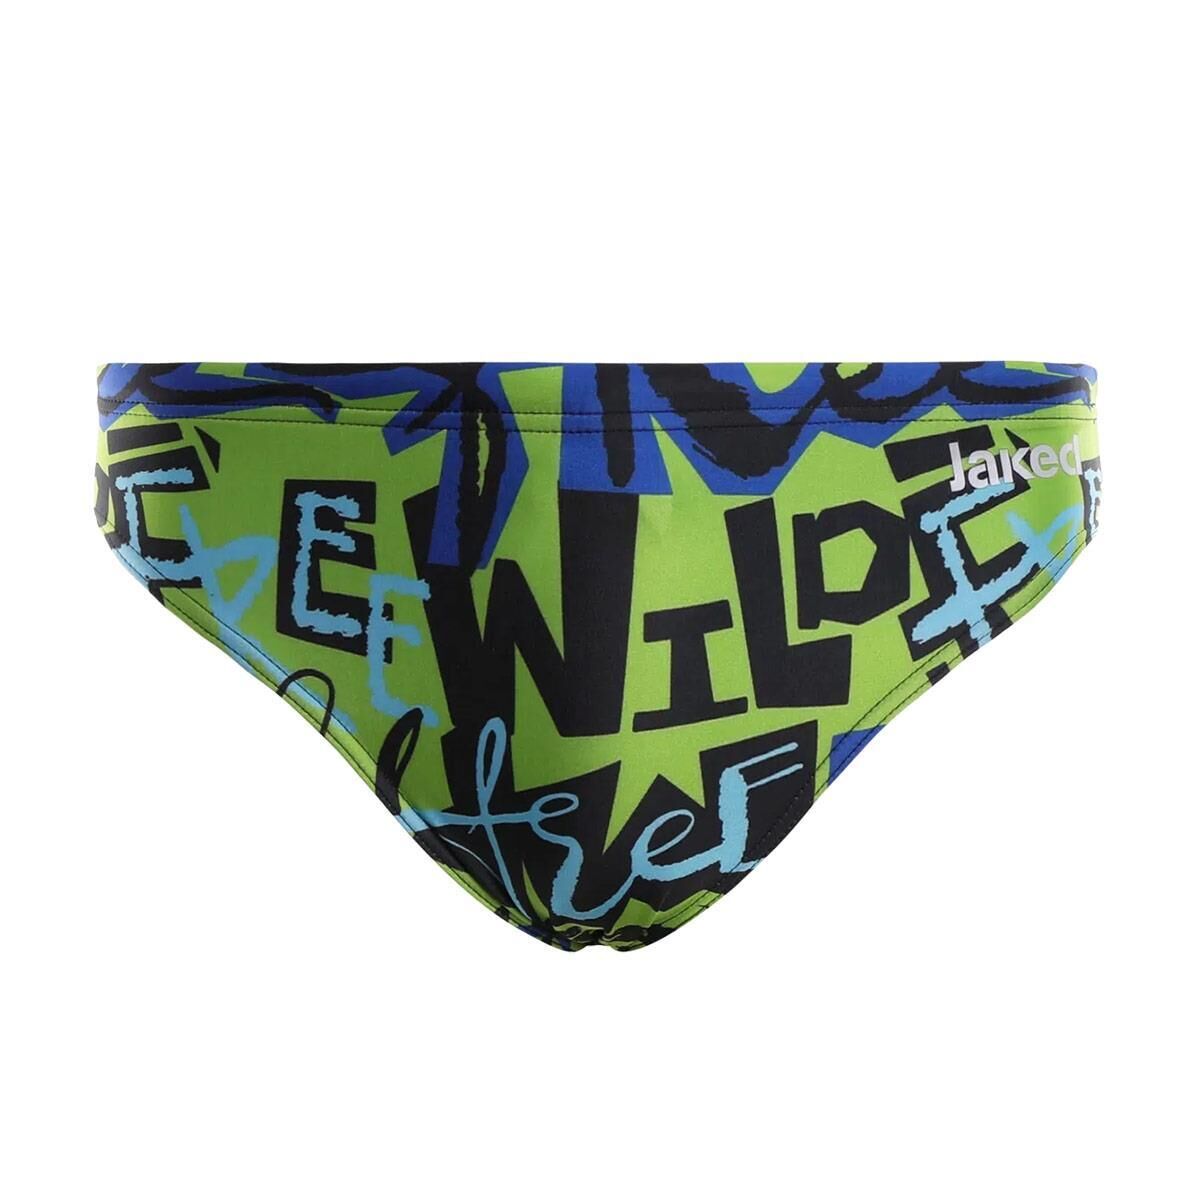 JAKED Jaked Mens Wild Briefs - Lime Green